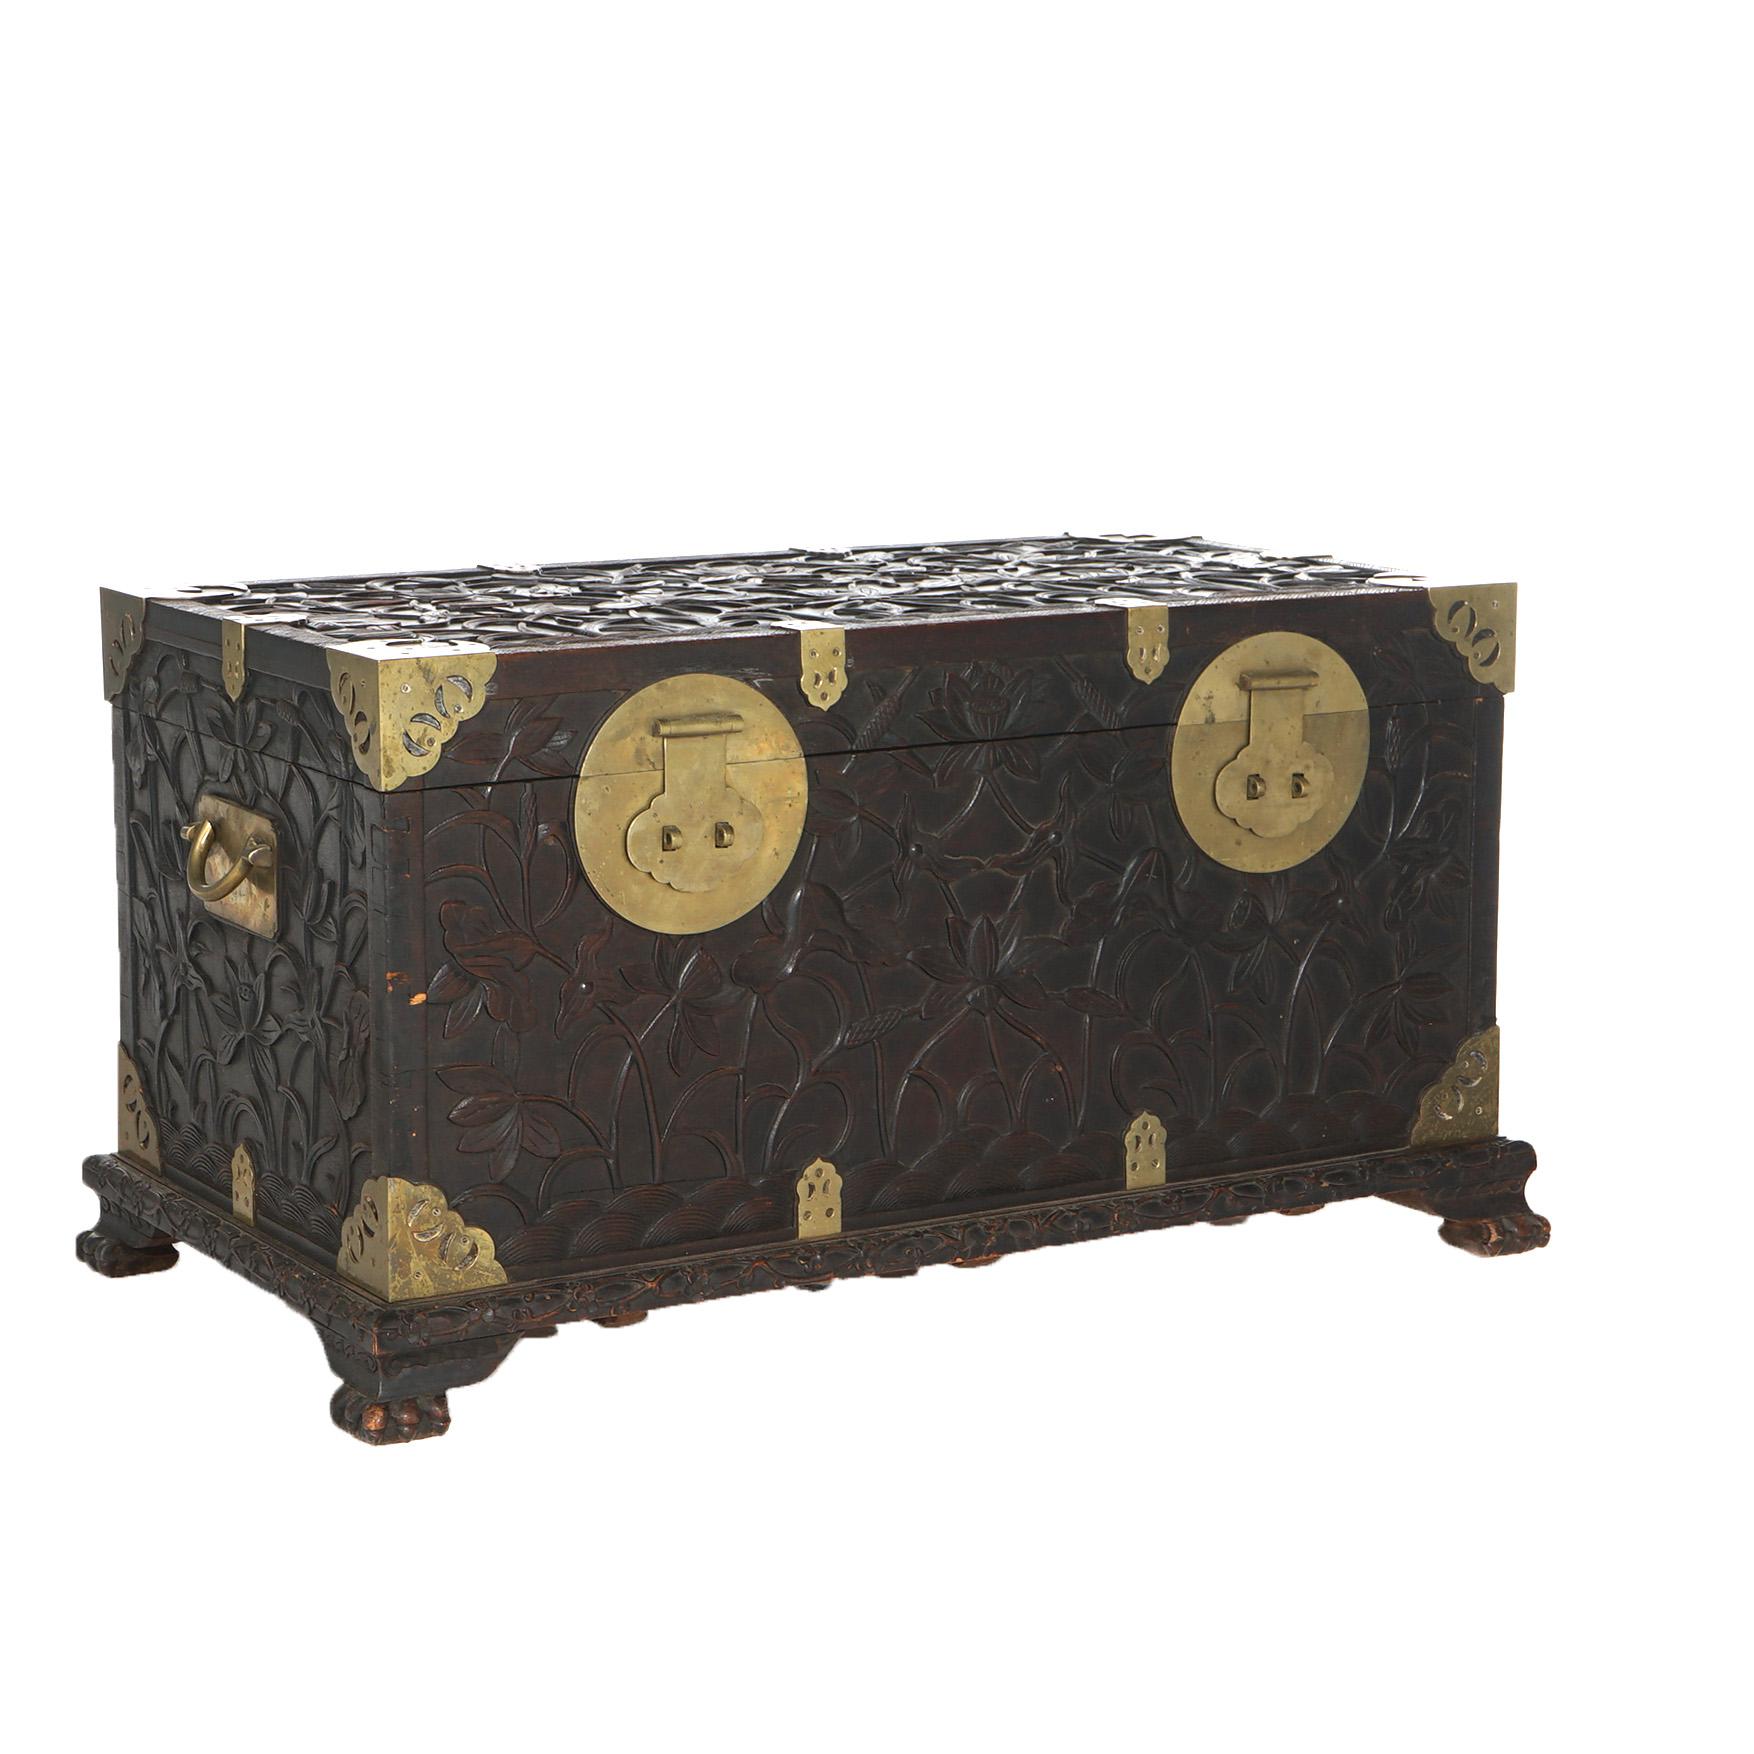 Antique Chinese Blanket Wedding Chest Carved in Relief with Floral Design C1890 For Sale 1